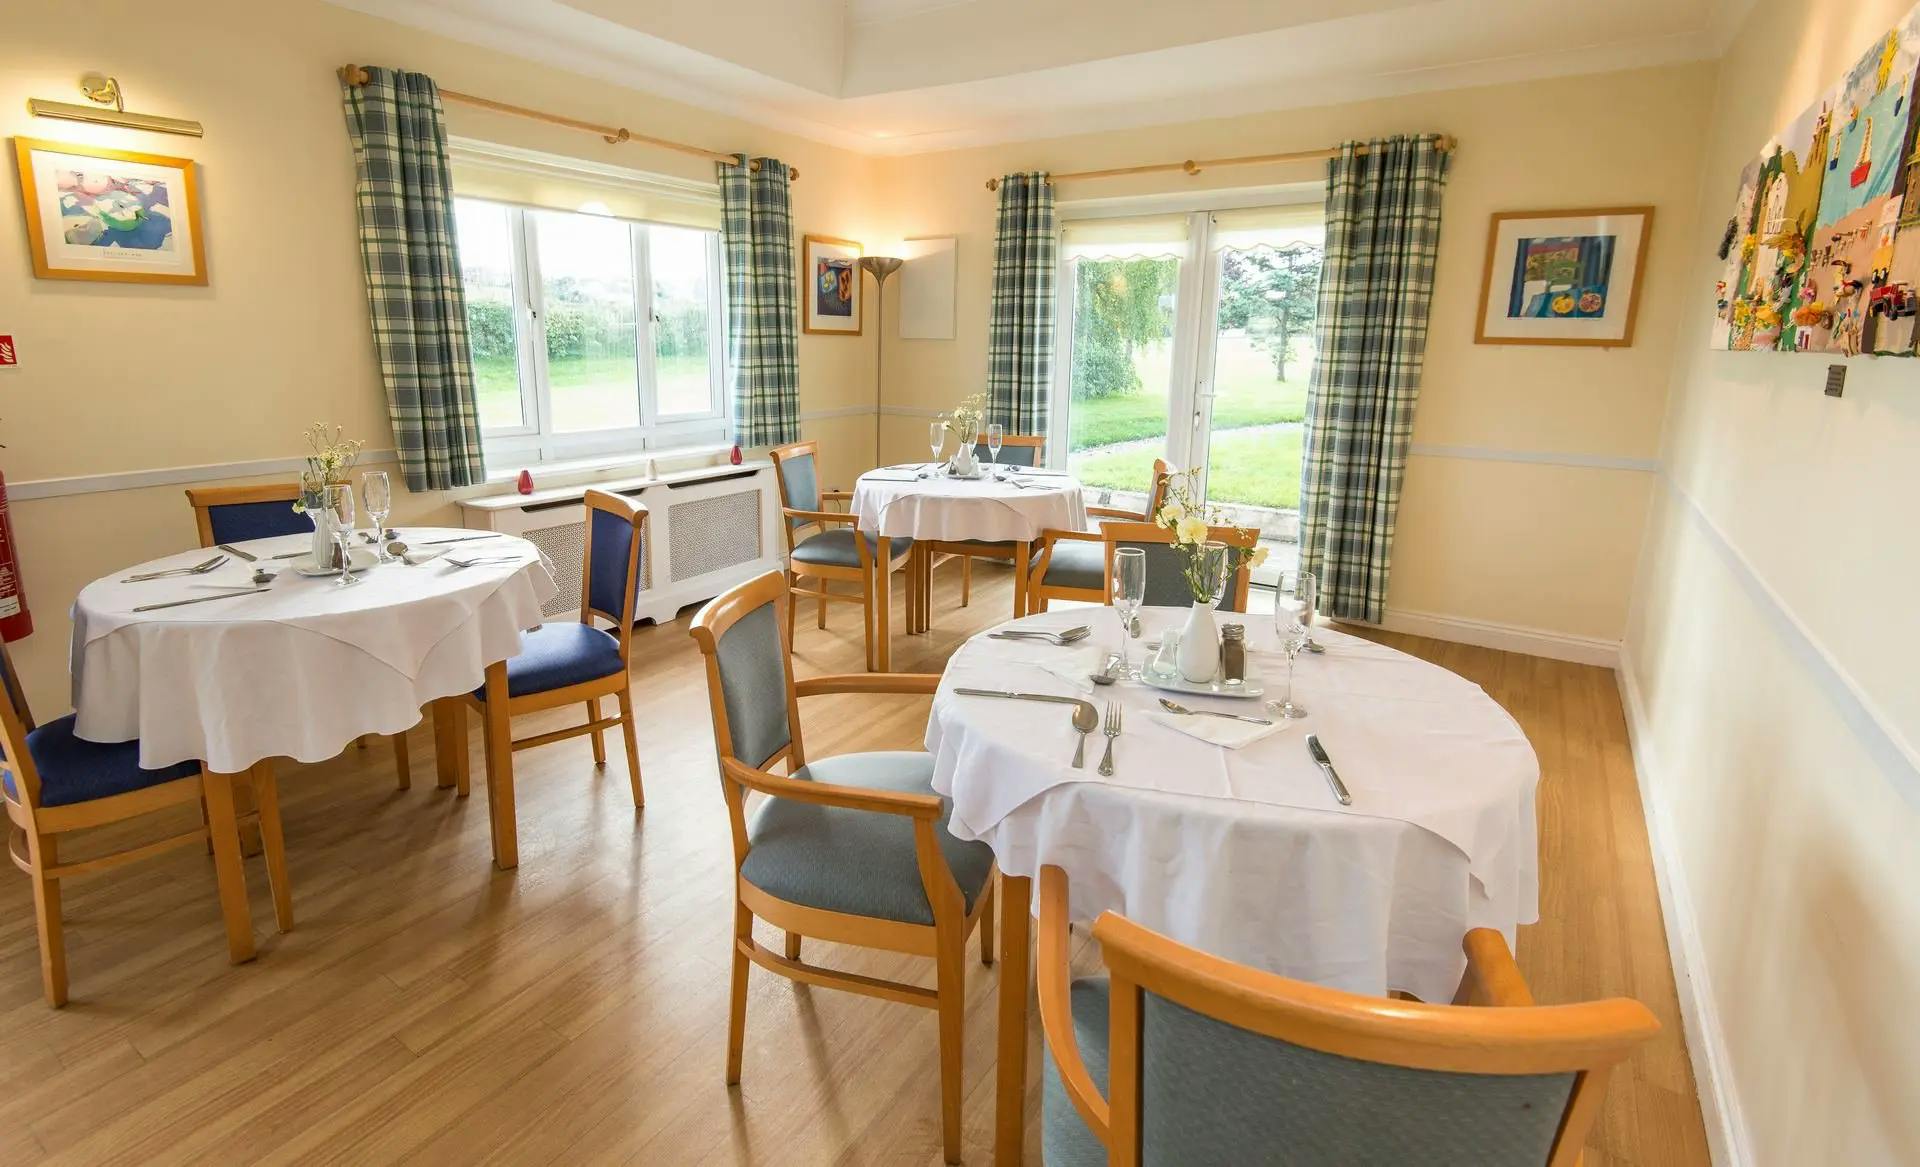 Dining Romm at Frethey House Care Home in Taunton, Somerset